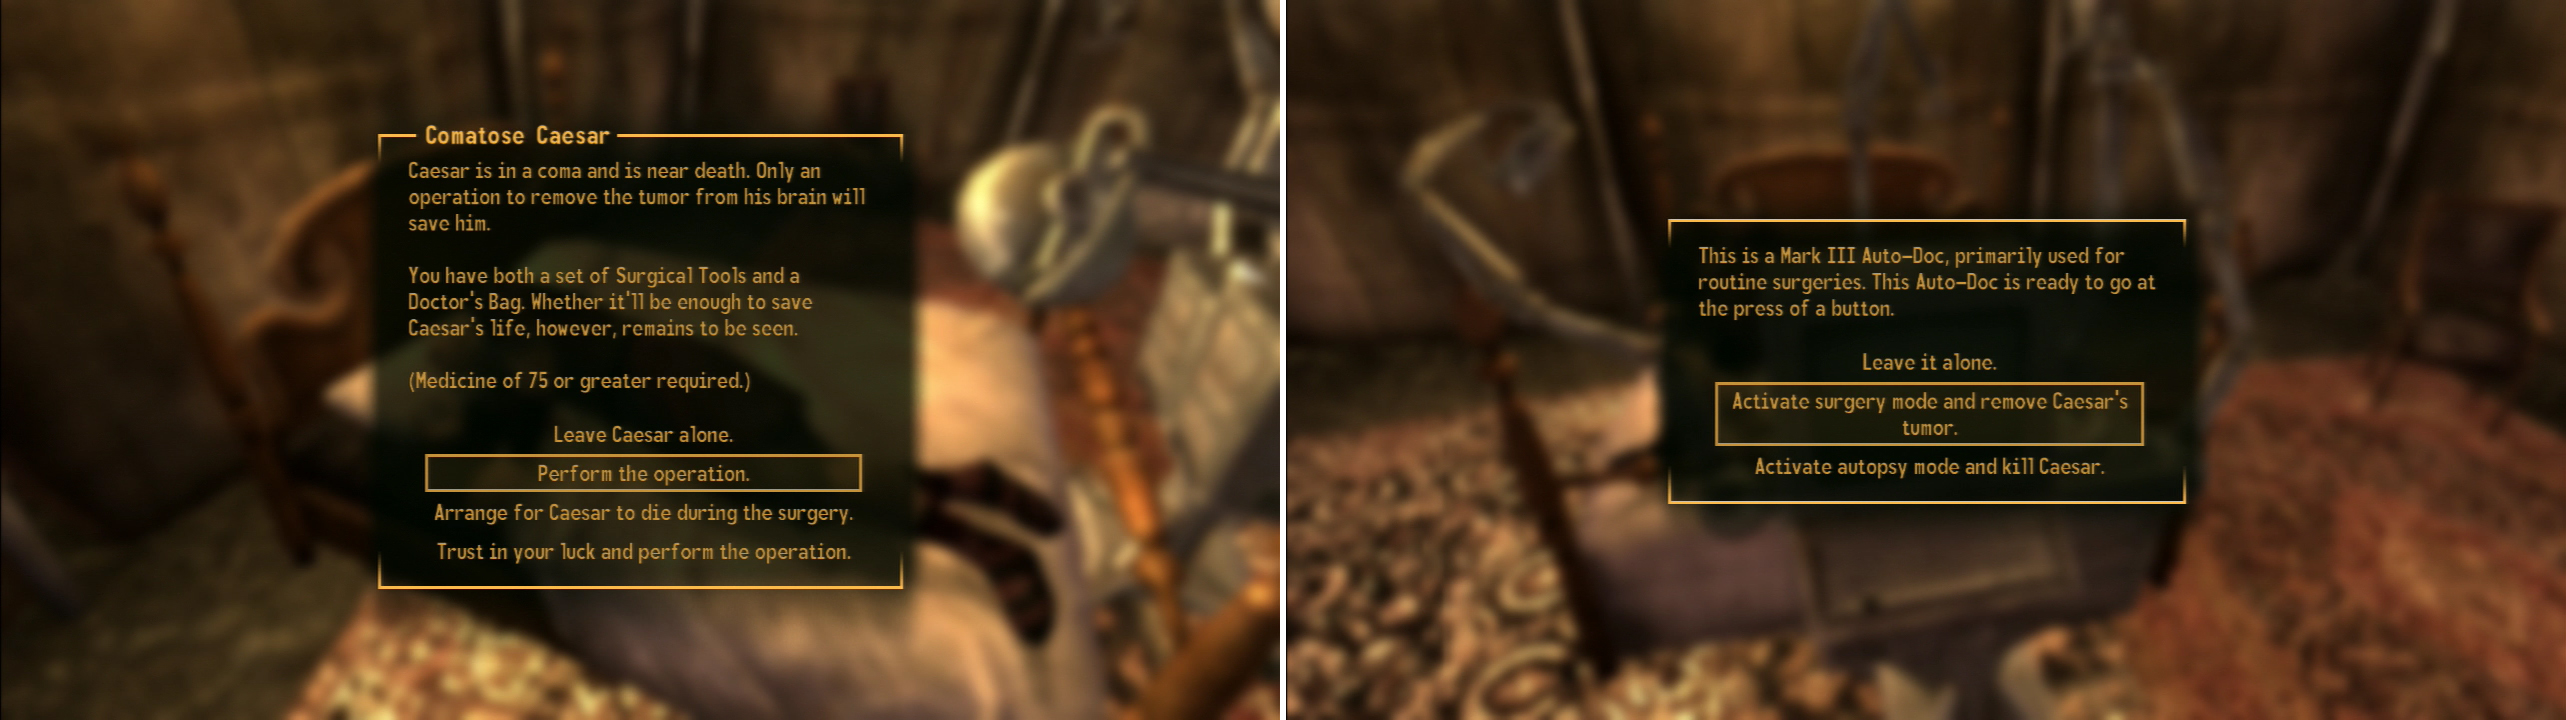 Either perform the surgery yourself, succeeding with a lot of Luck or Medicine skill (left) or use the repaired Auto-Doc to do it for you (right). Either way, you have the option to intentionally botch the surgery to kill Caesar.